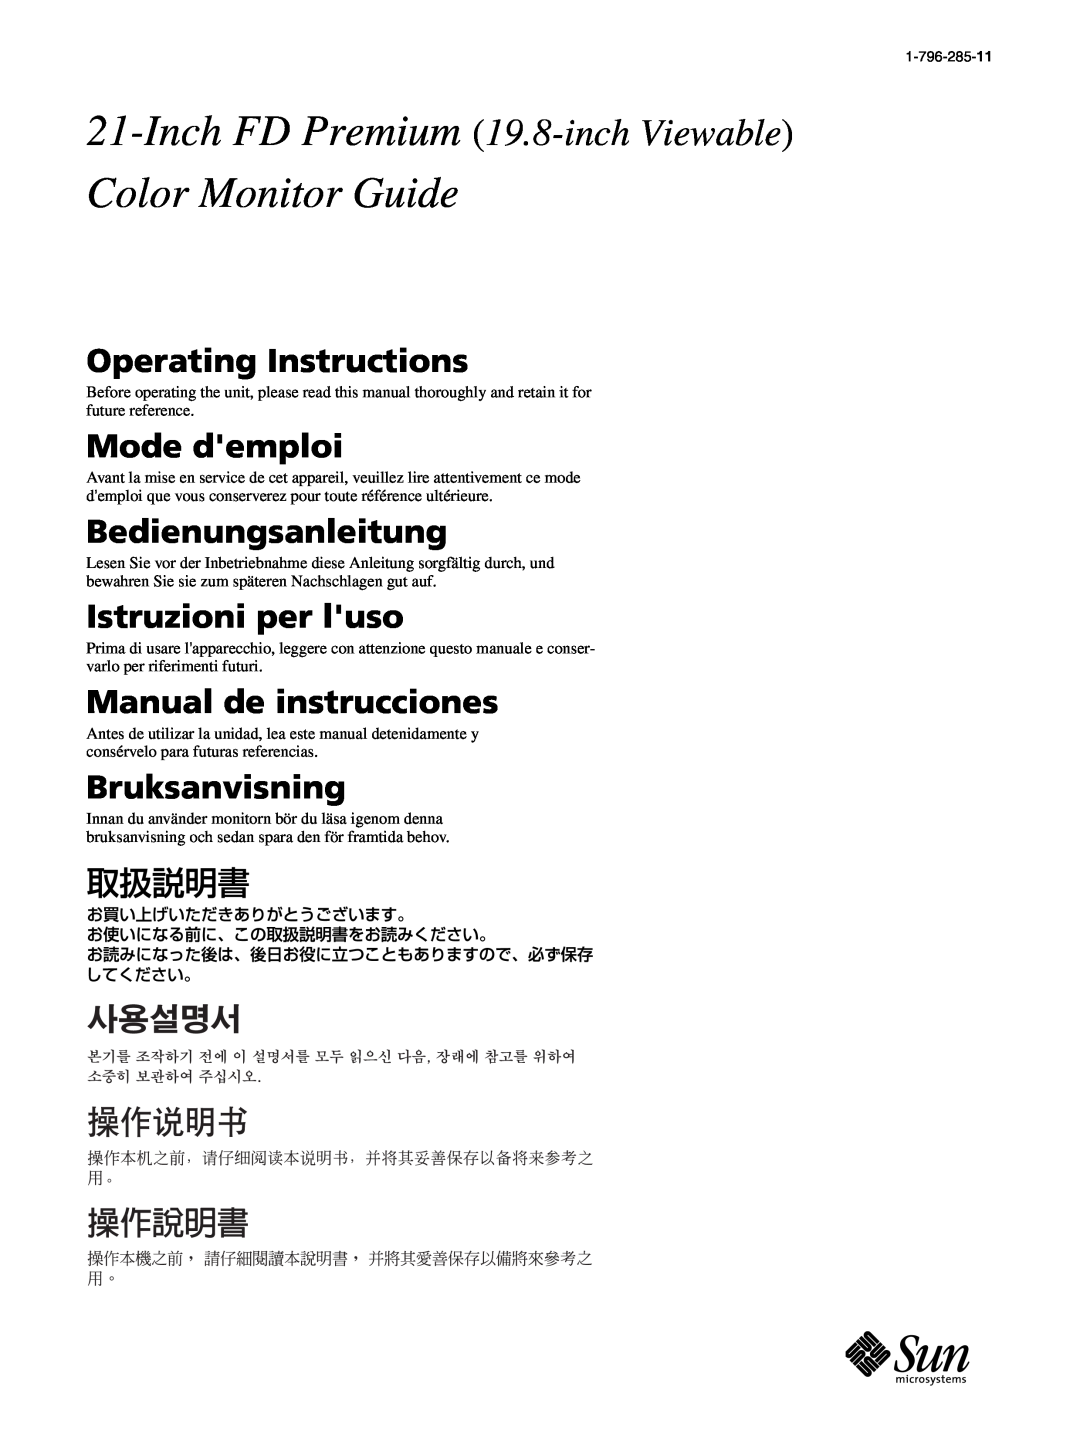 Sony GDM-5510 operating instructions Inch FD Premium 19.8-inch Viewable, Color Monitor Guide, Operating Instructions 